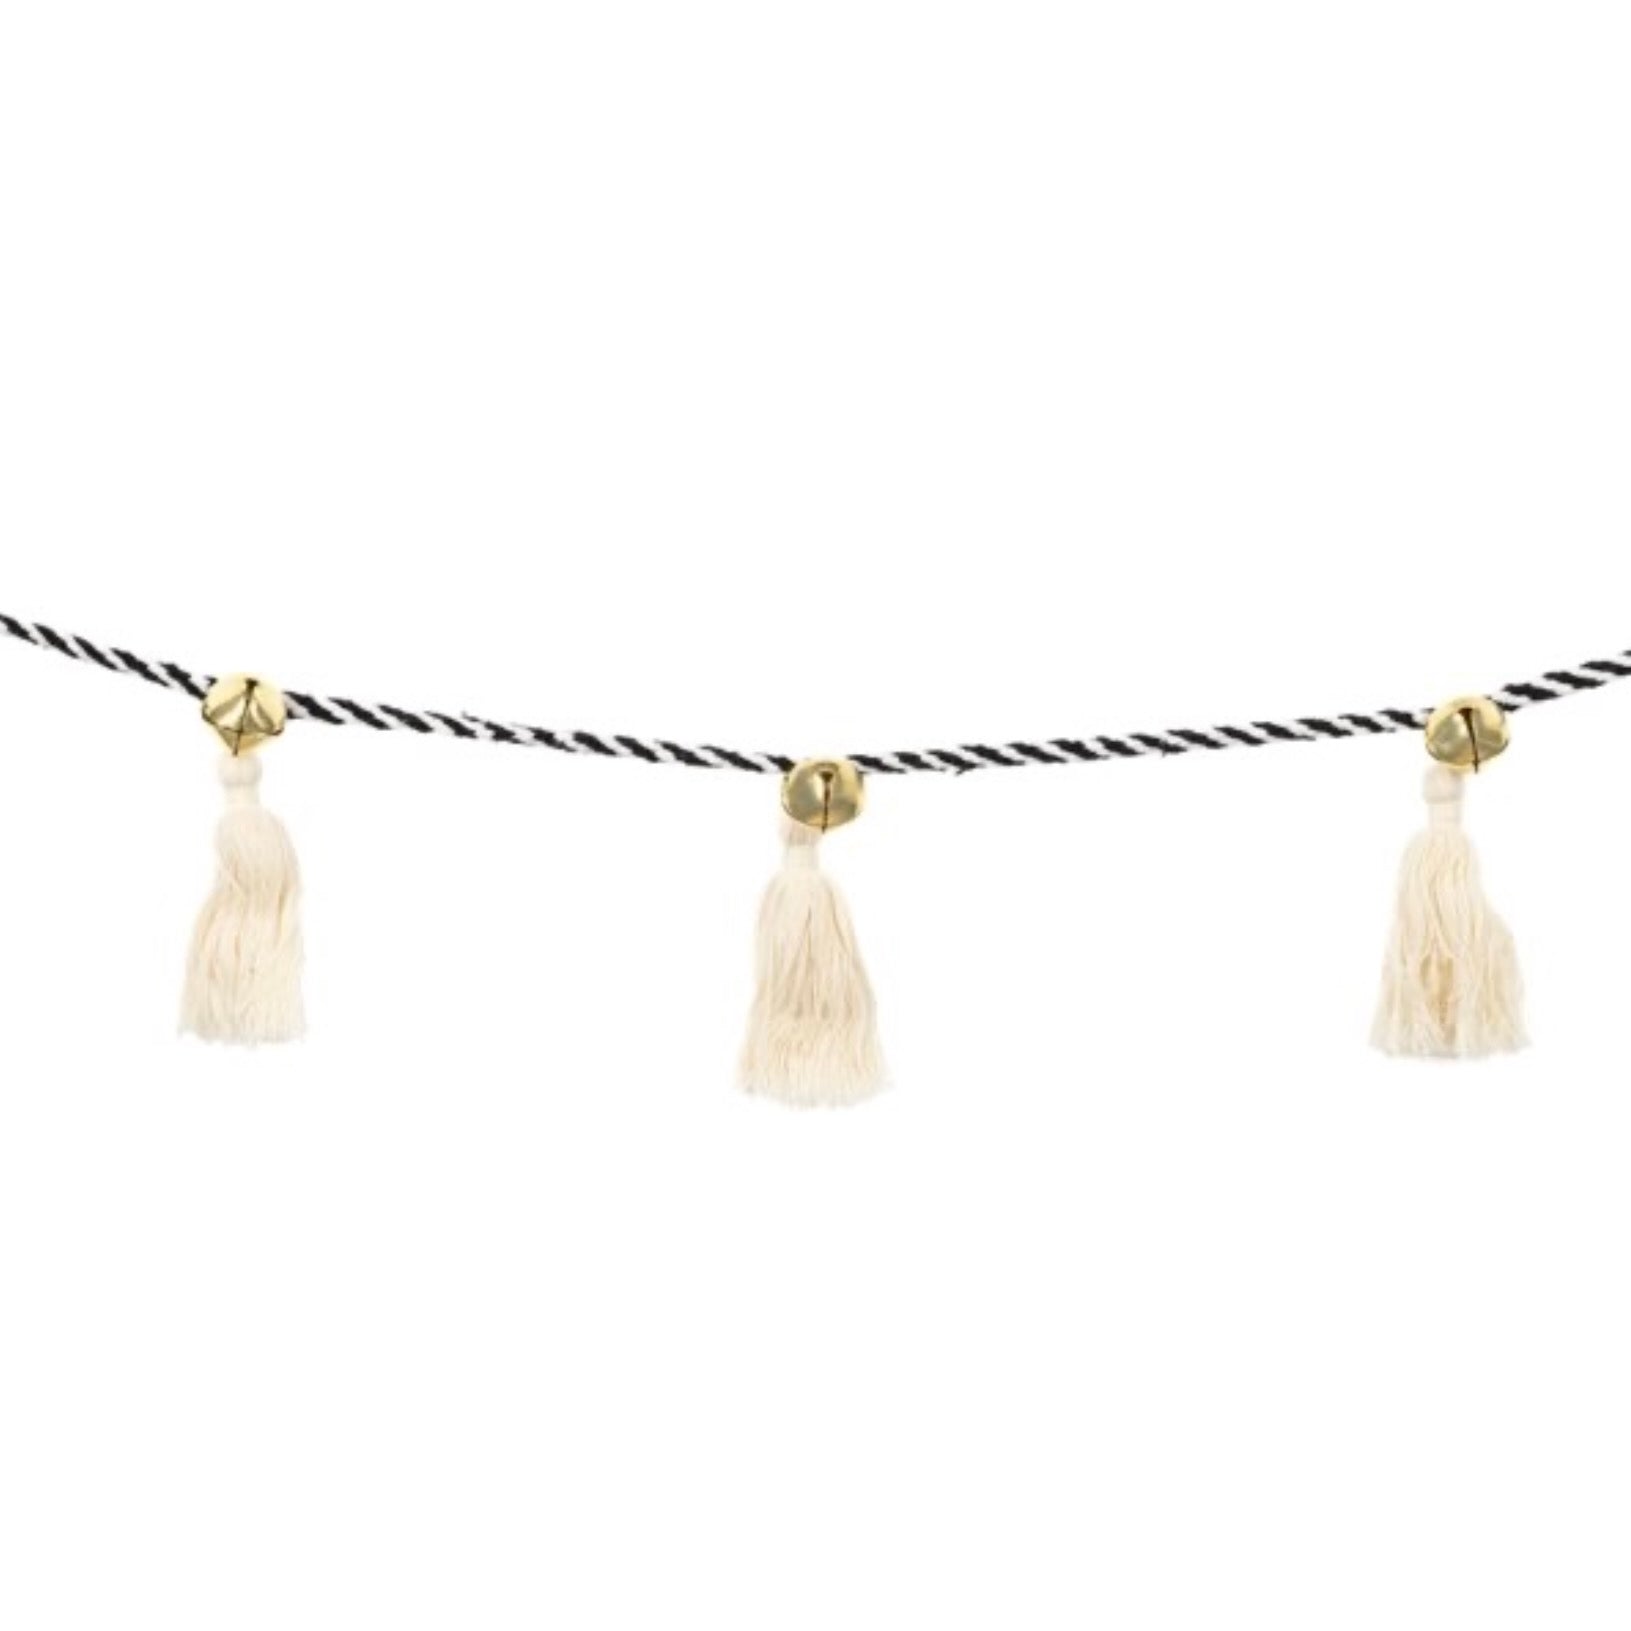 Black and White Tassel Garland with Bells